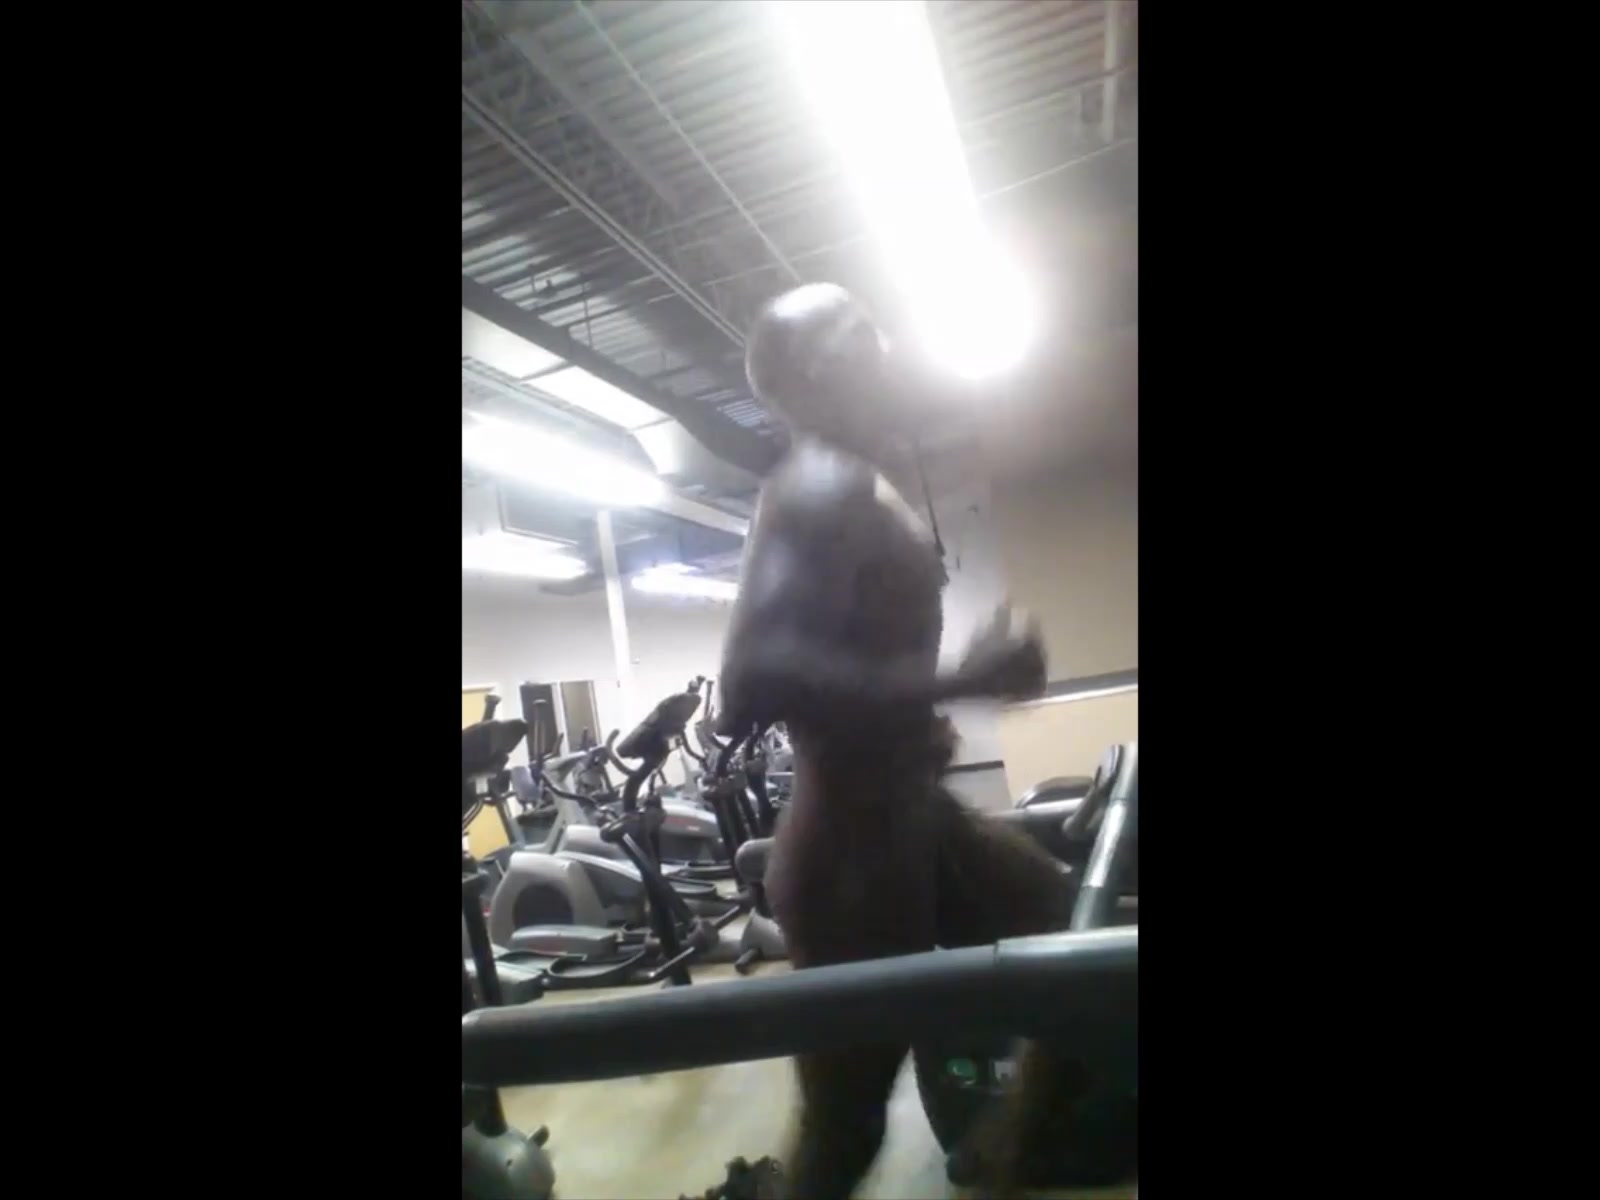 Black Stud Naked in the Gym (Flopping Cock)